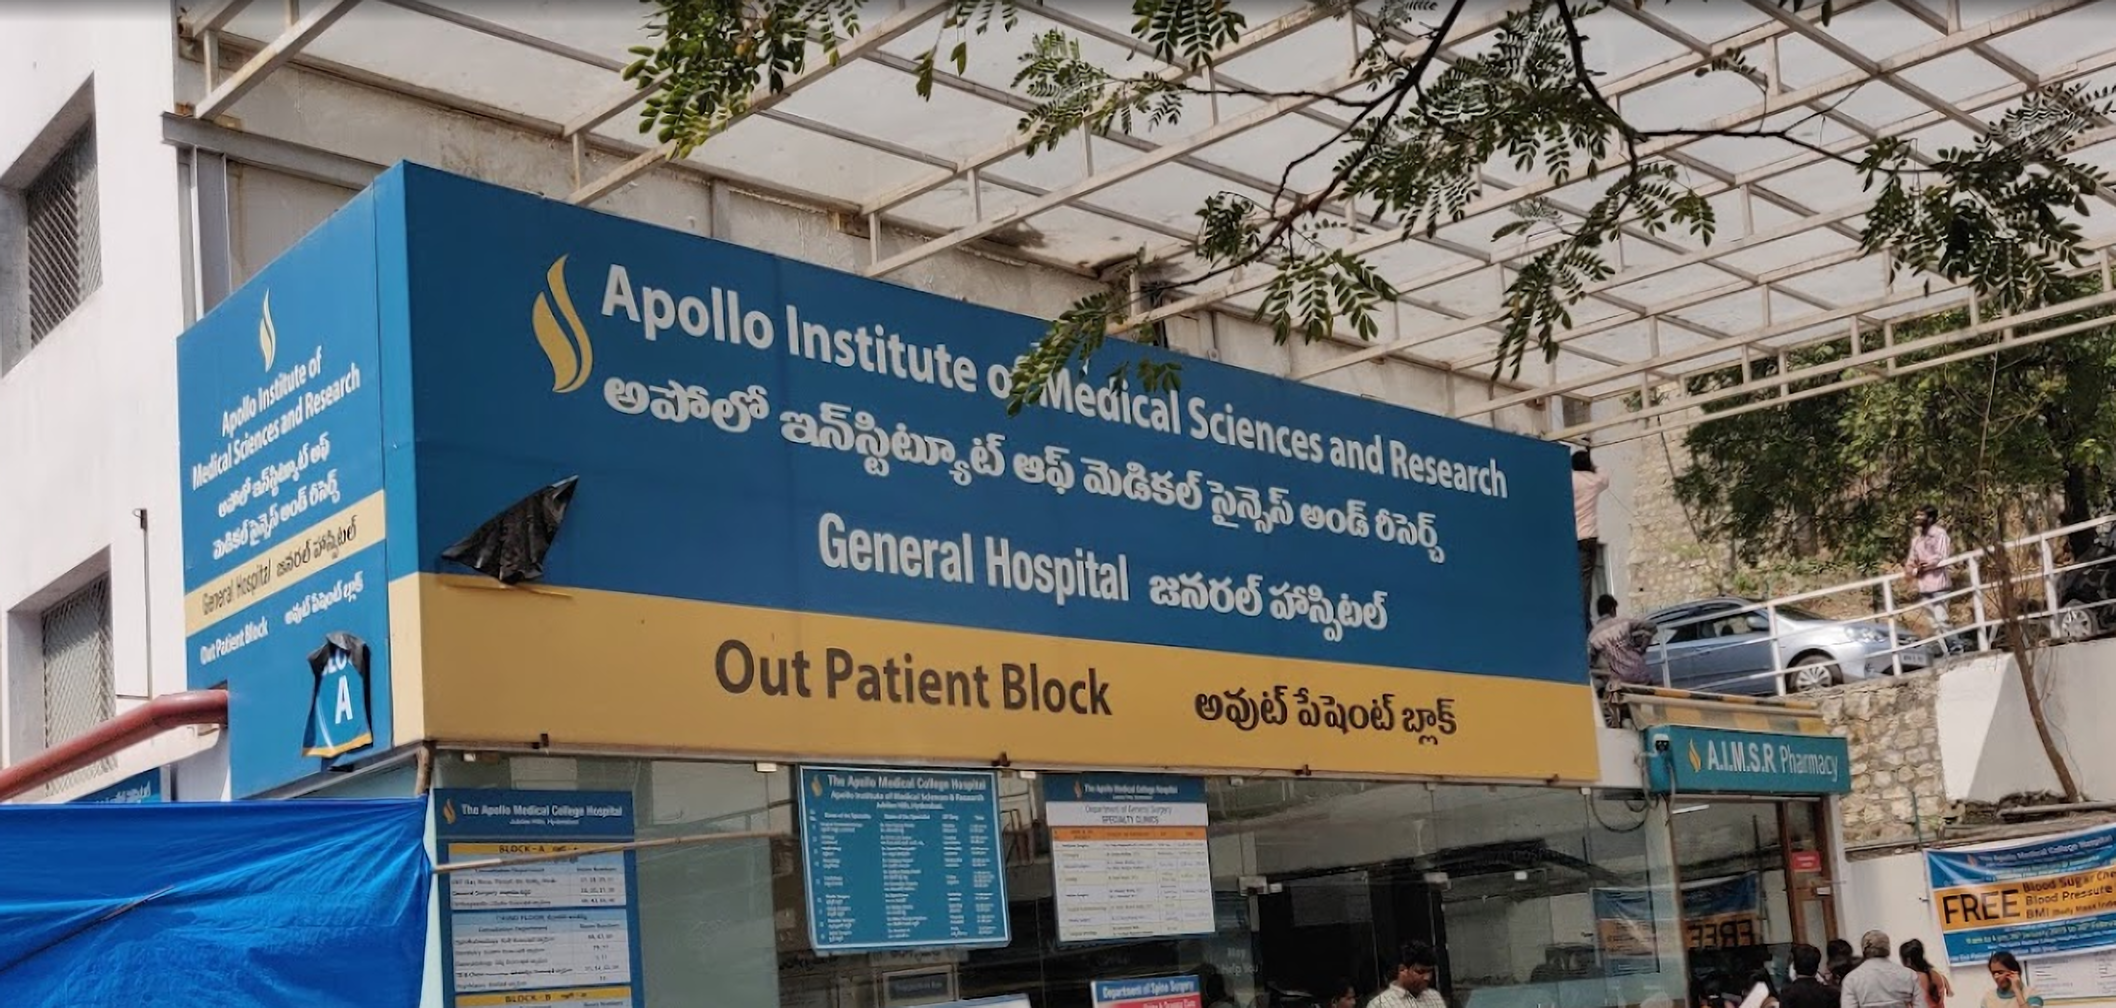 Apollo Institute Of Medical Sciences And Research photo